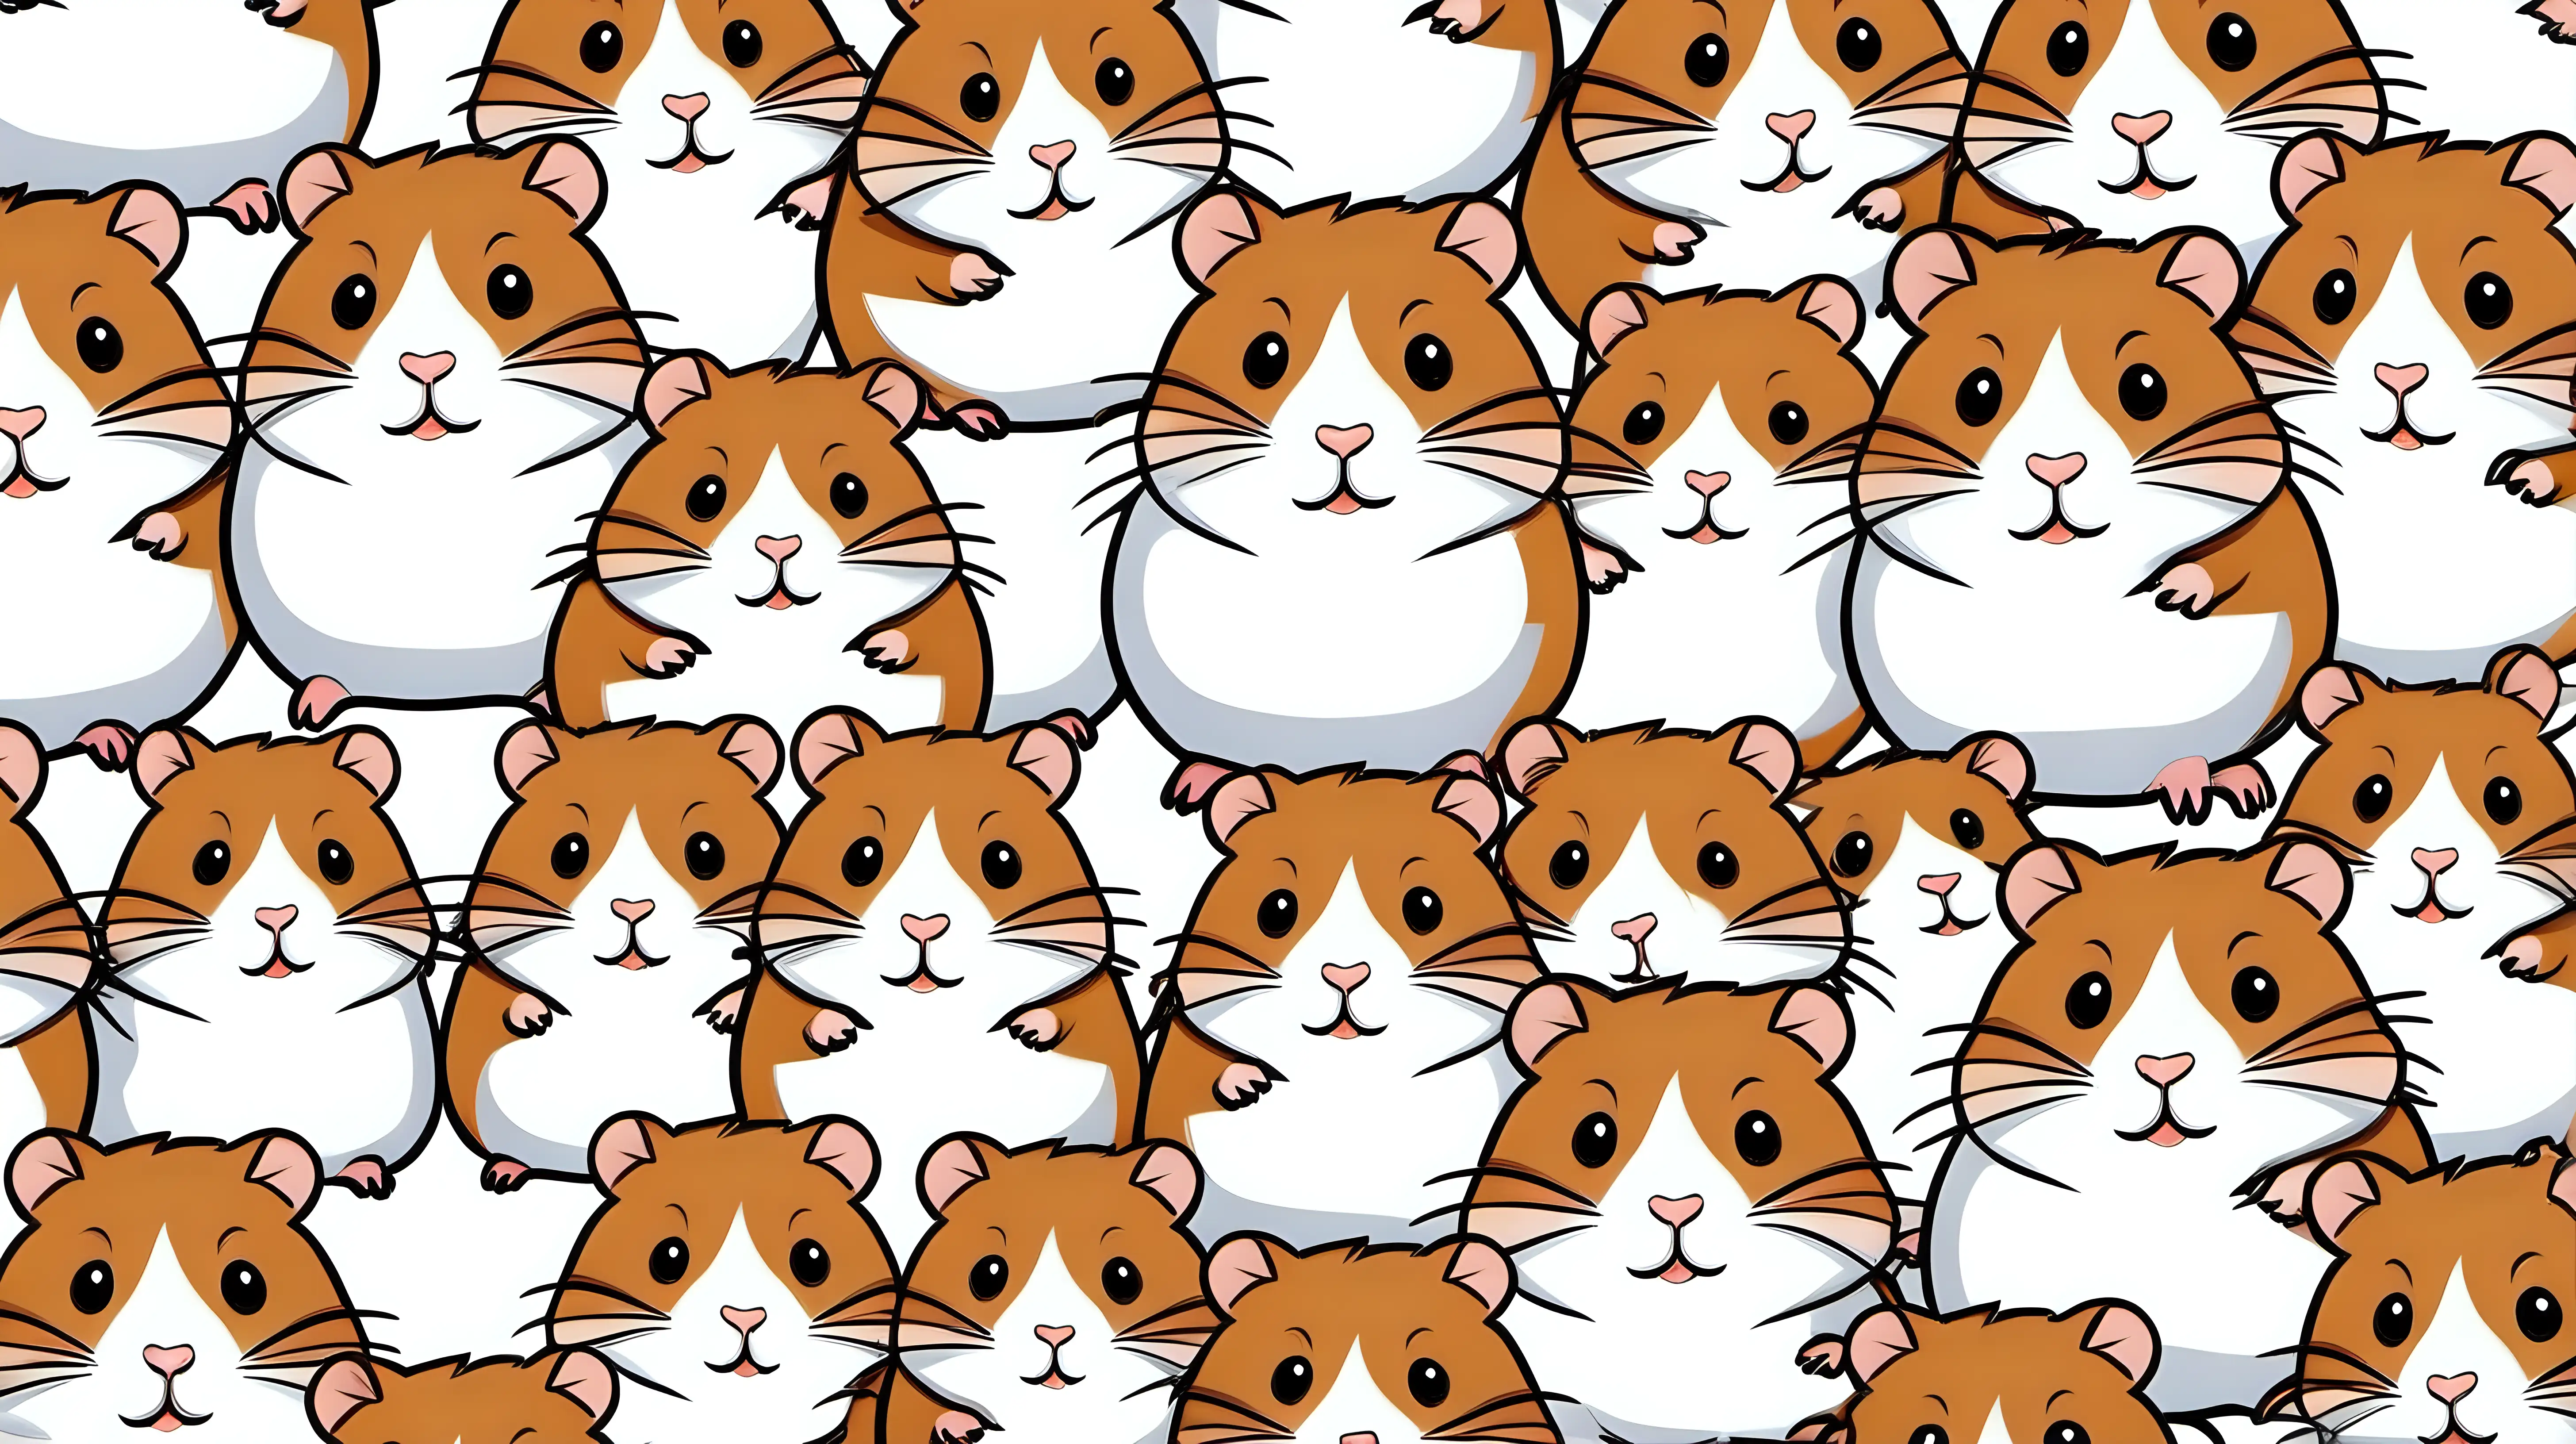 Adorable HandDrawn Brown and White Hamsters Pattern